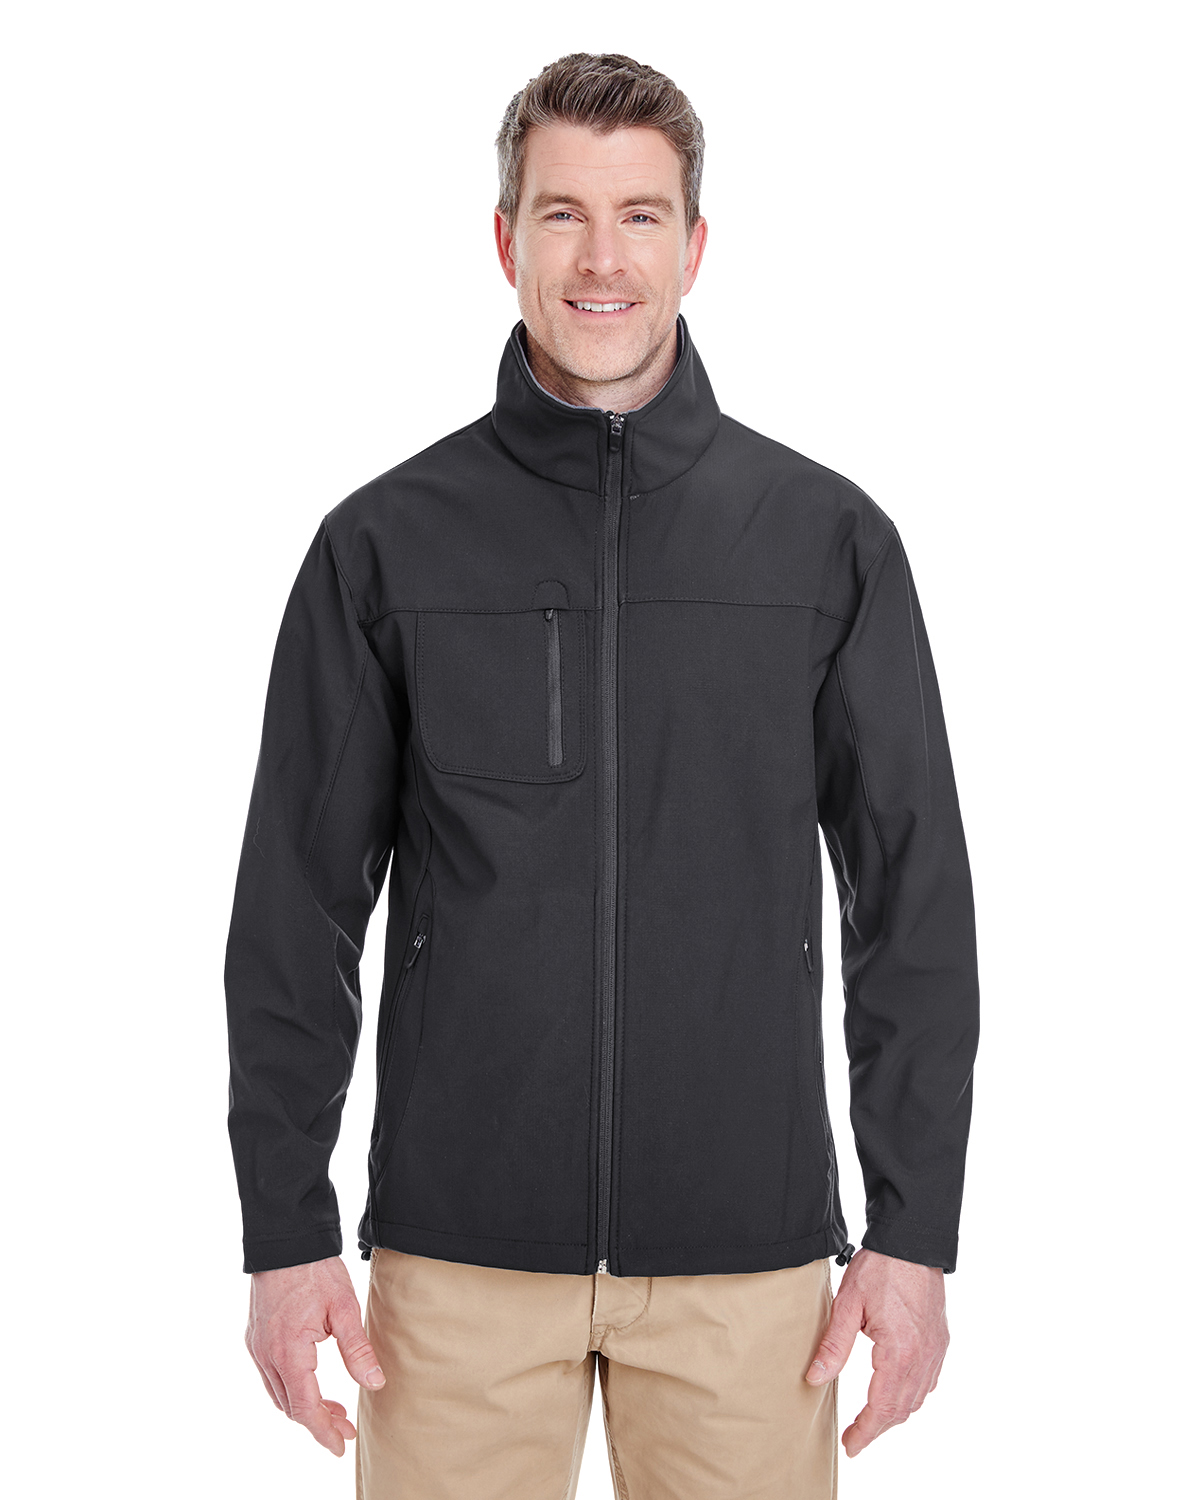 UltraClub 8280 Adult Ripstop Soft Shell Jacket with Cadet Collar - Shirtmax